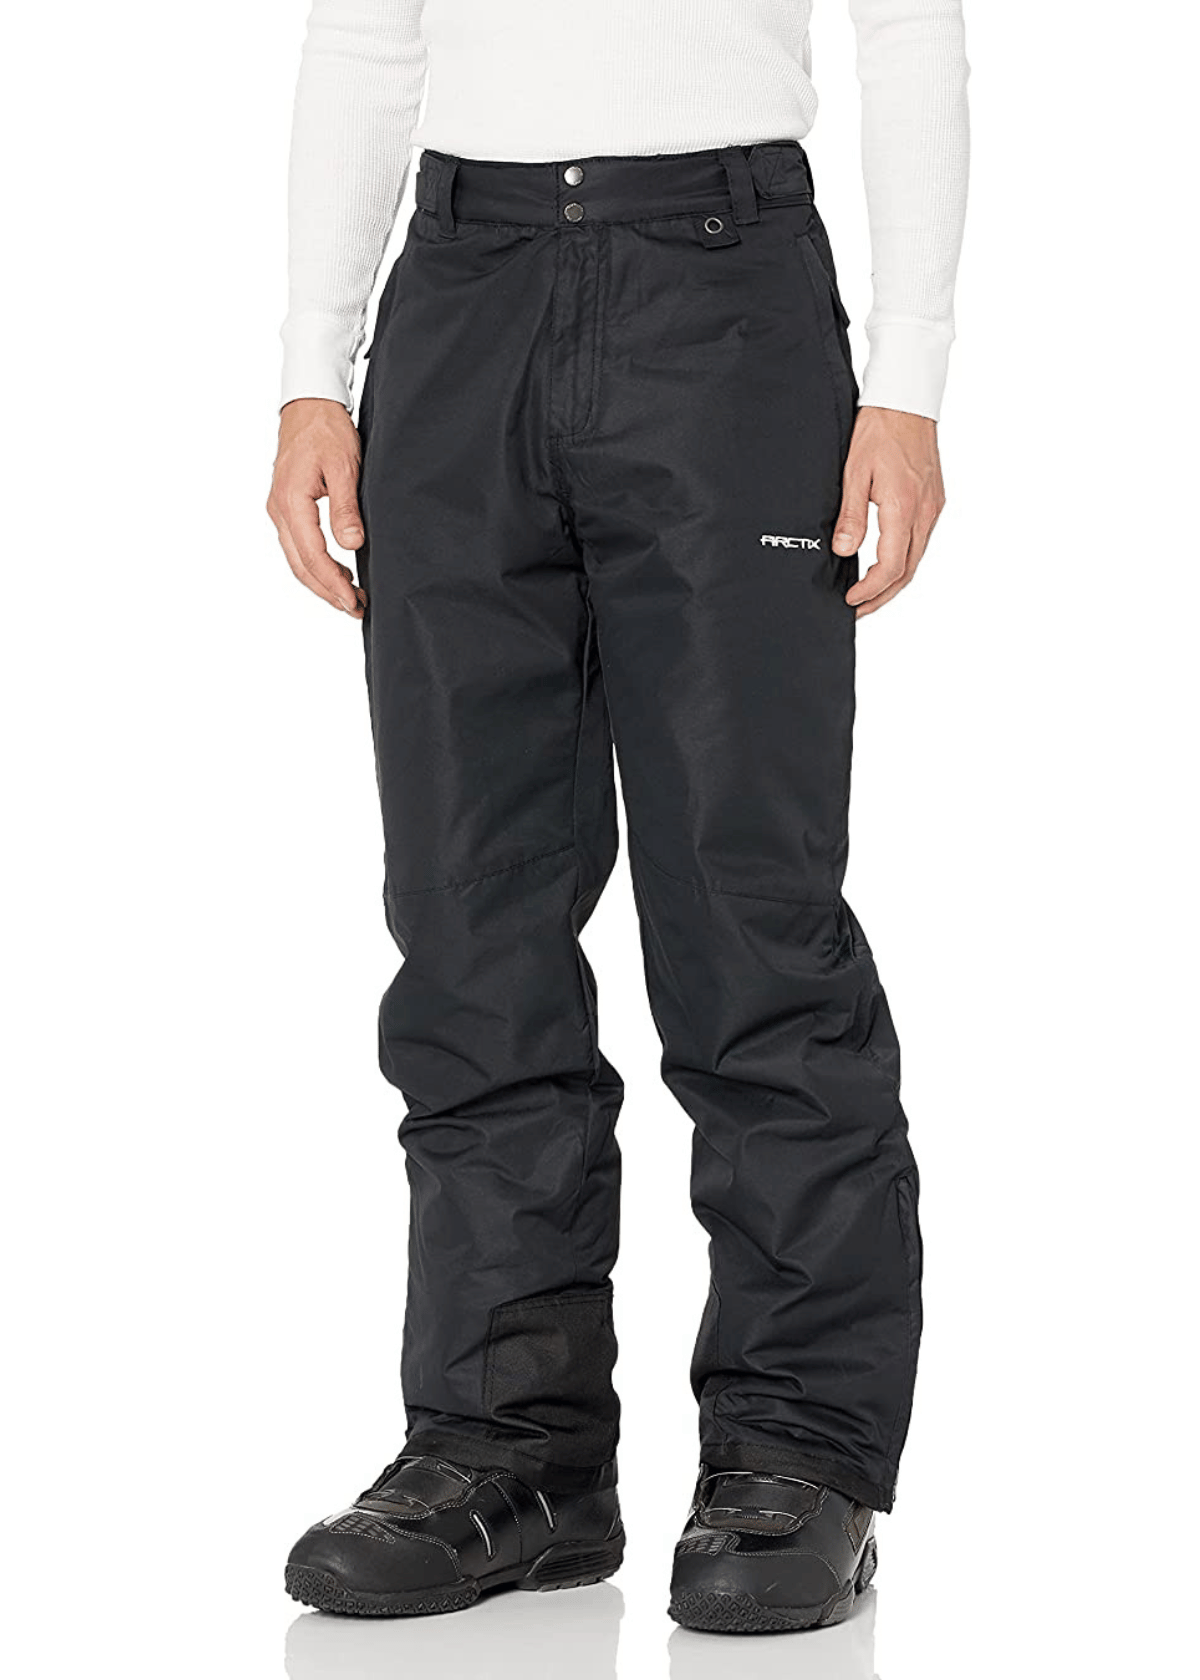 The Best Mens Ski Pants for Extreme Cold and High Altitude